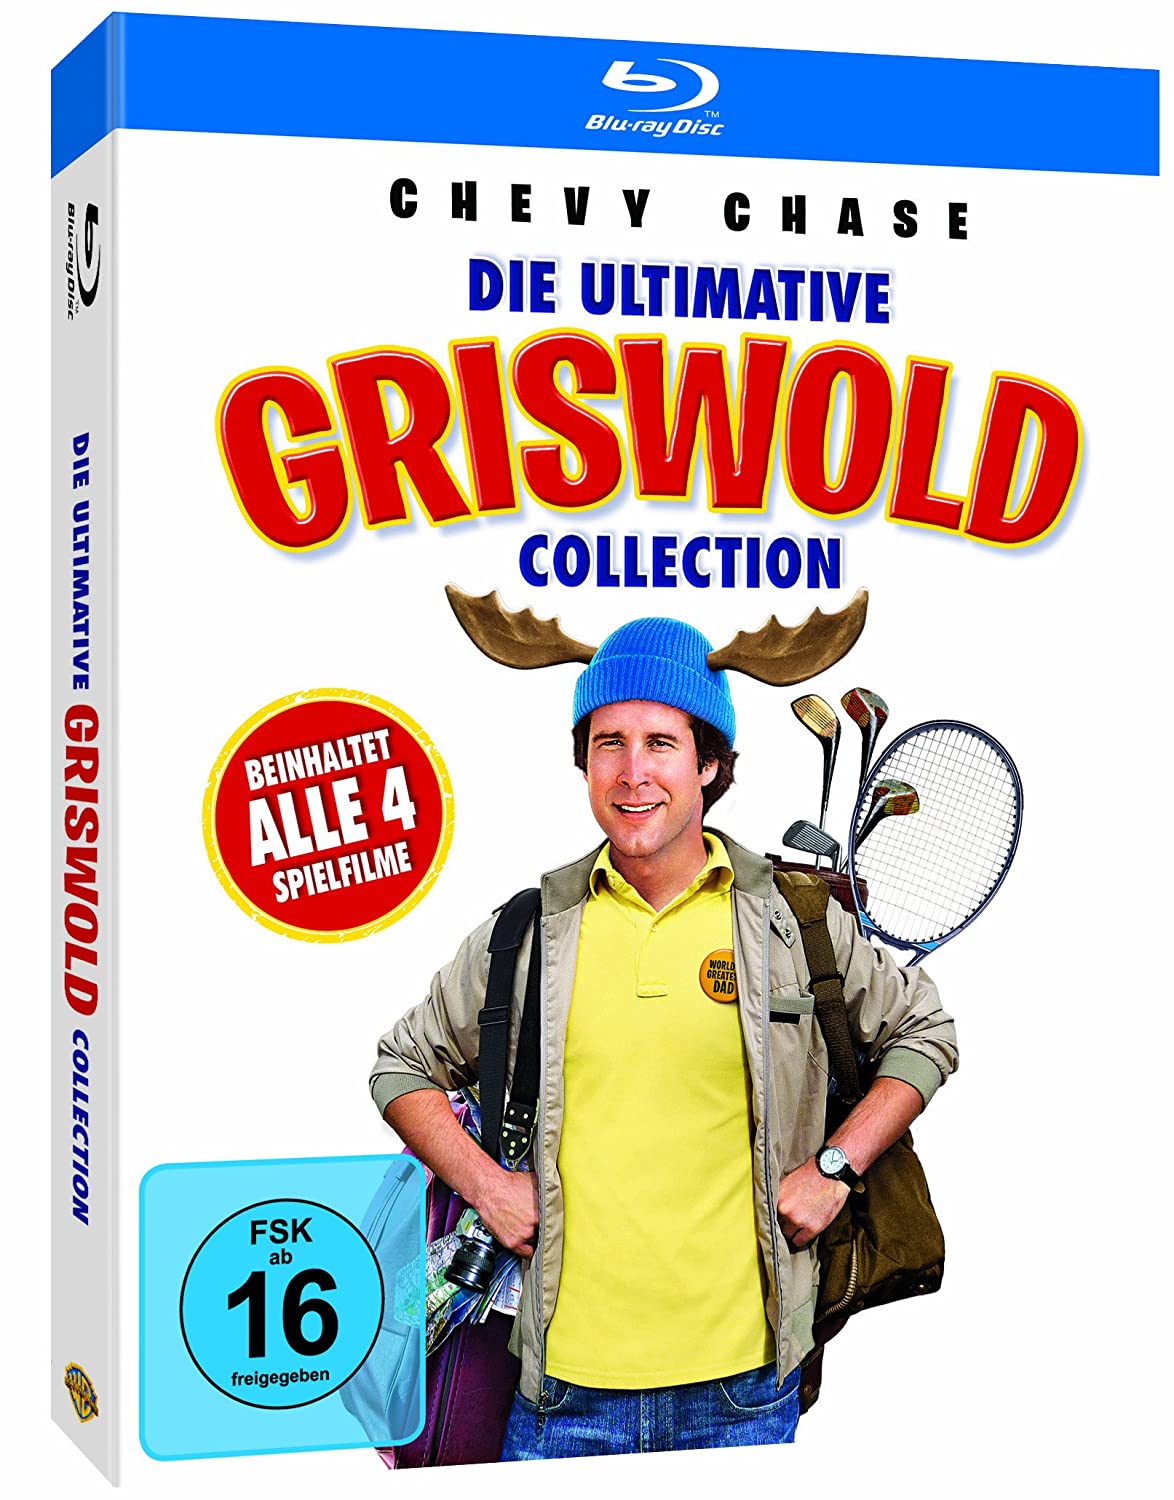 Die ultimative Griswold Collection - Alle 4 Spielfilme